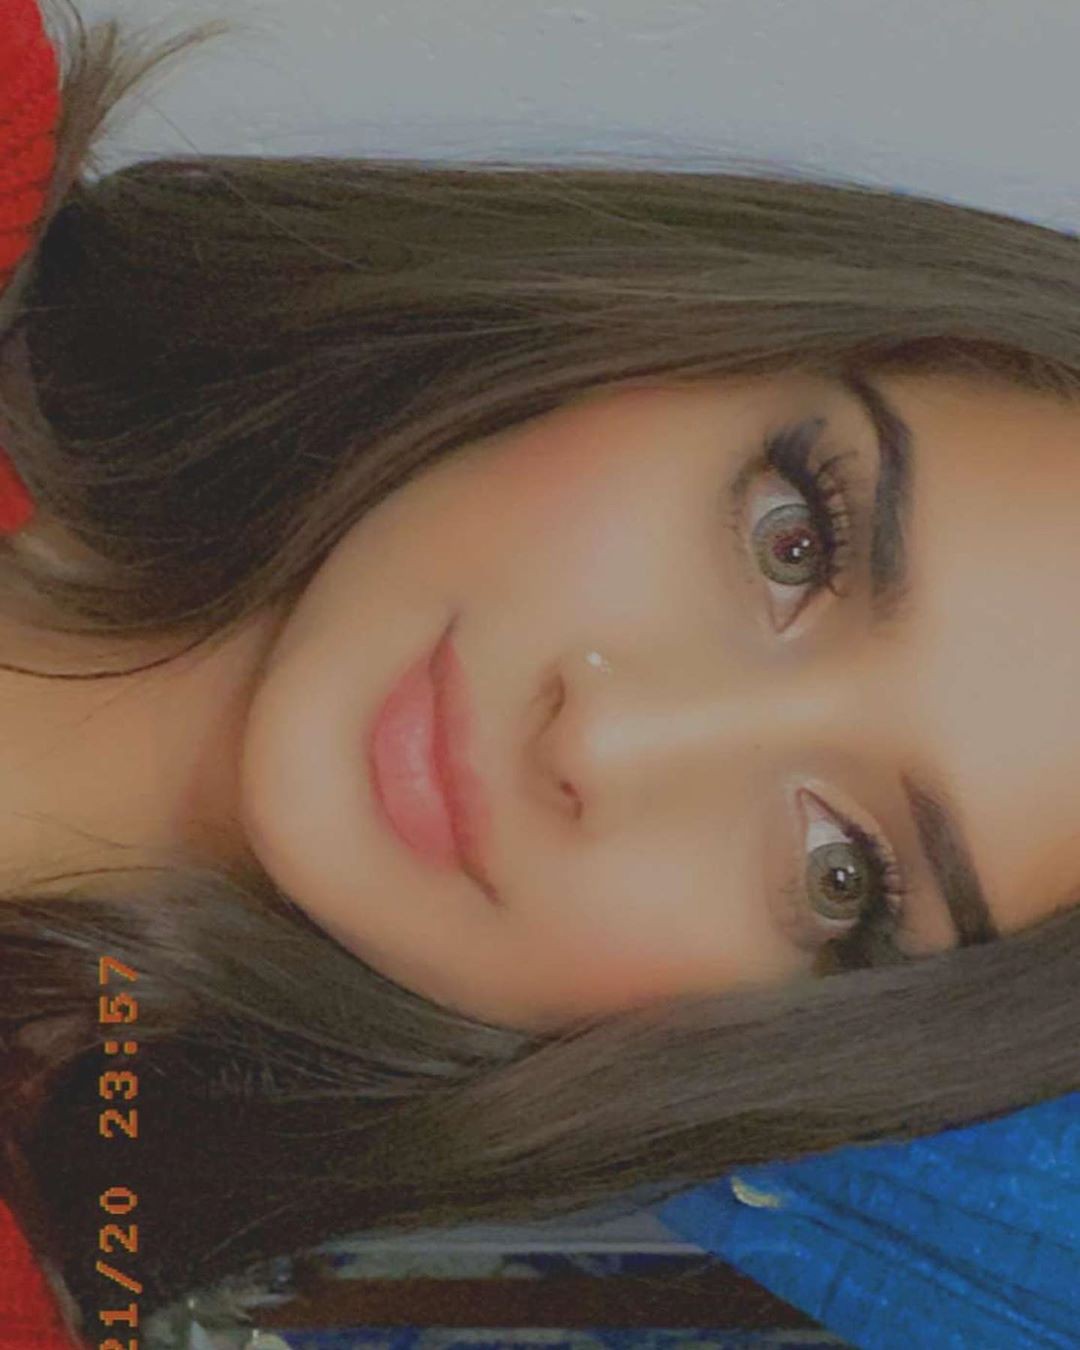 Alishbah Anjum Lovely Face, Glossy Lips, Girls Hairstyle: Chicas Lindas Instagram,  Chicas Lindas De Instagram,  alishbah anjum instagram  